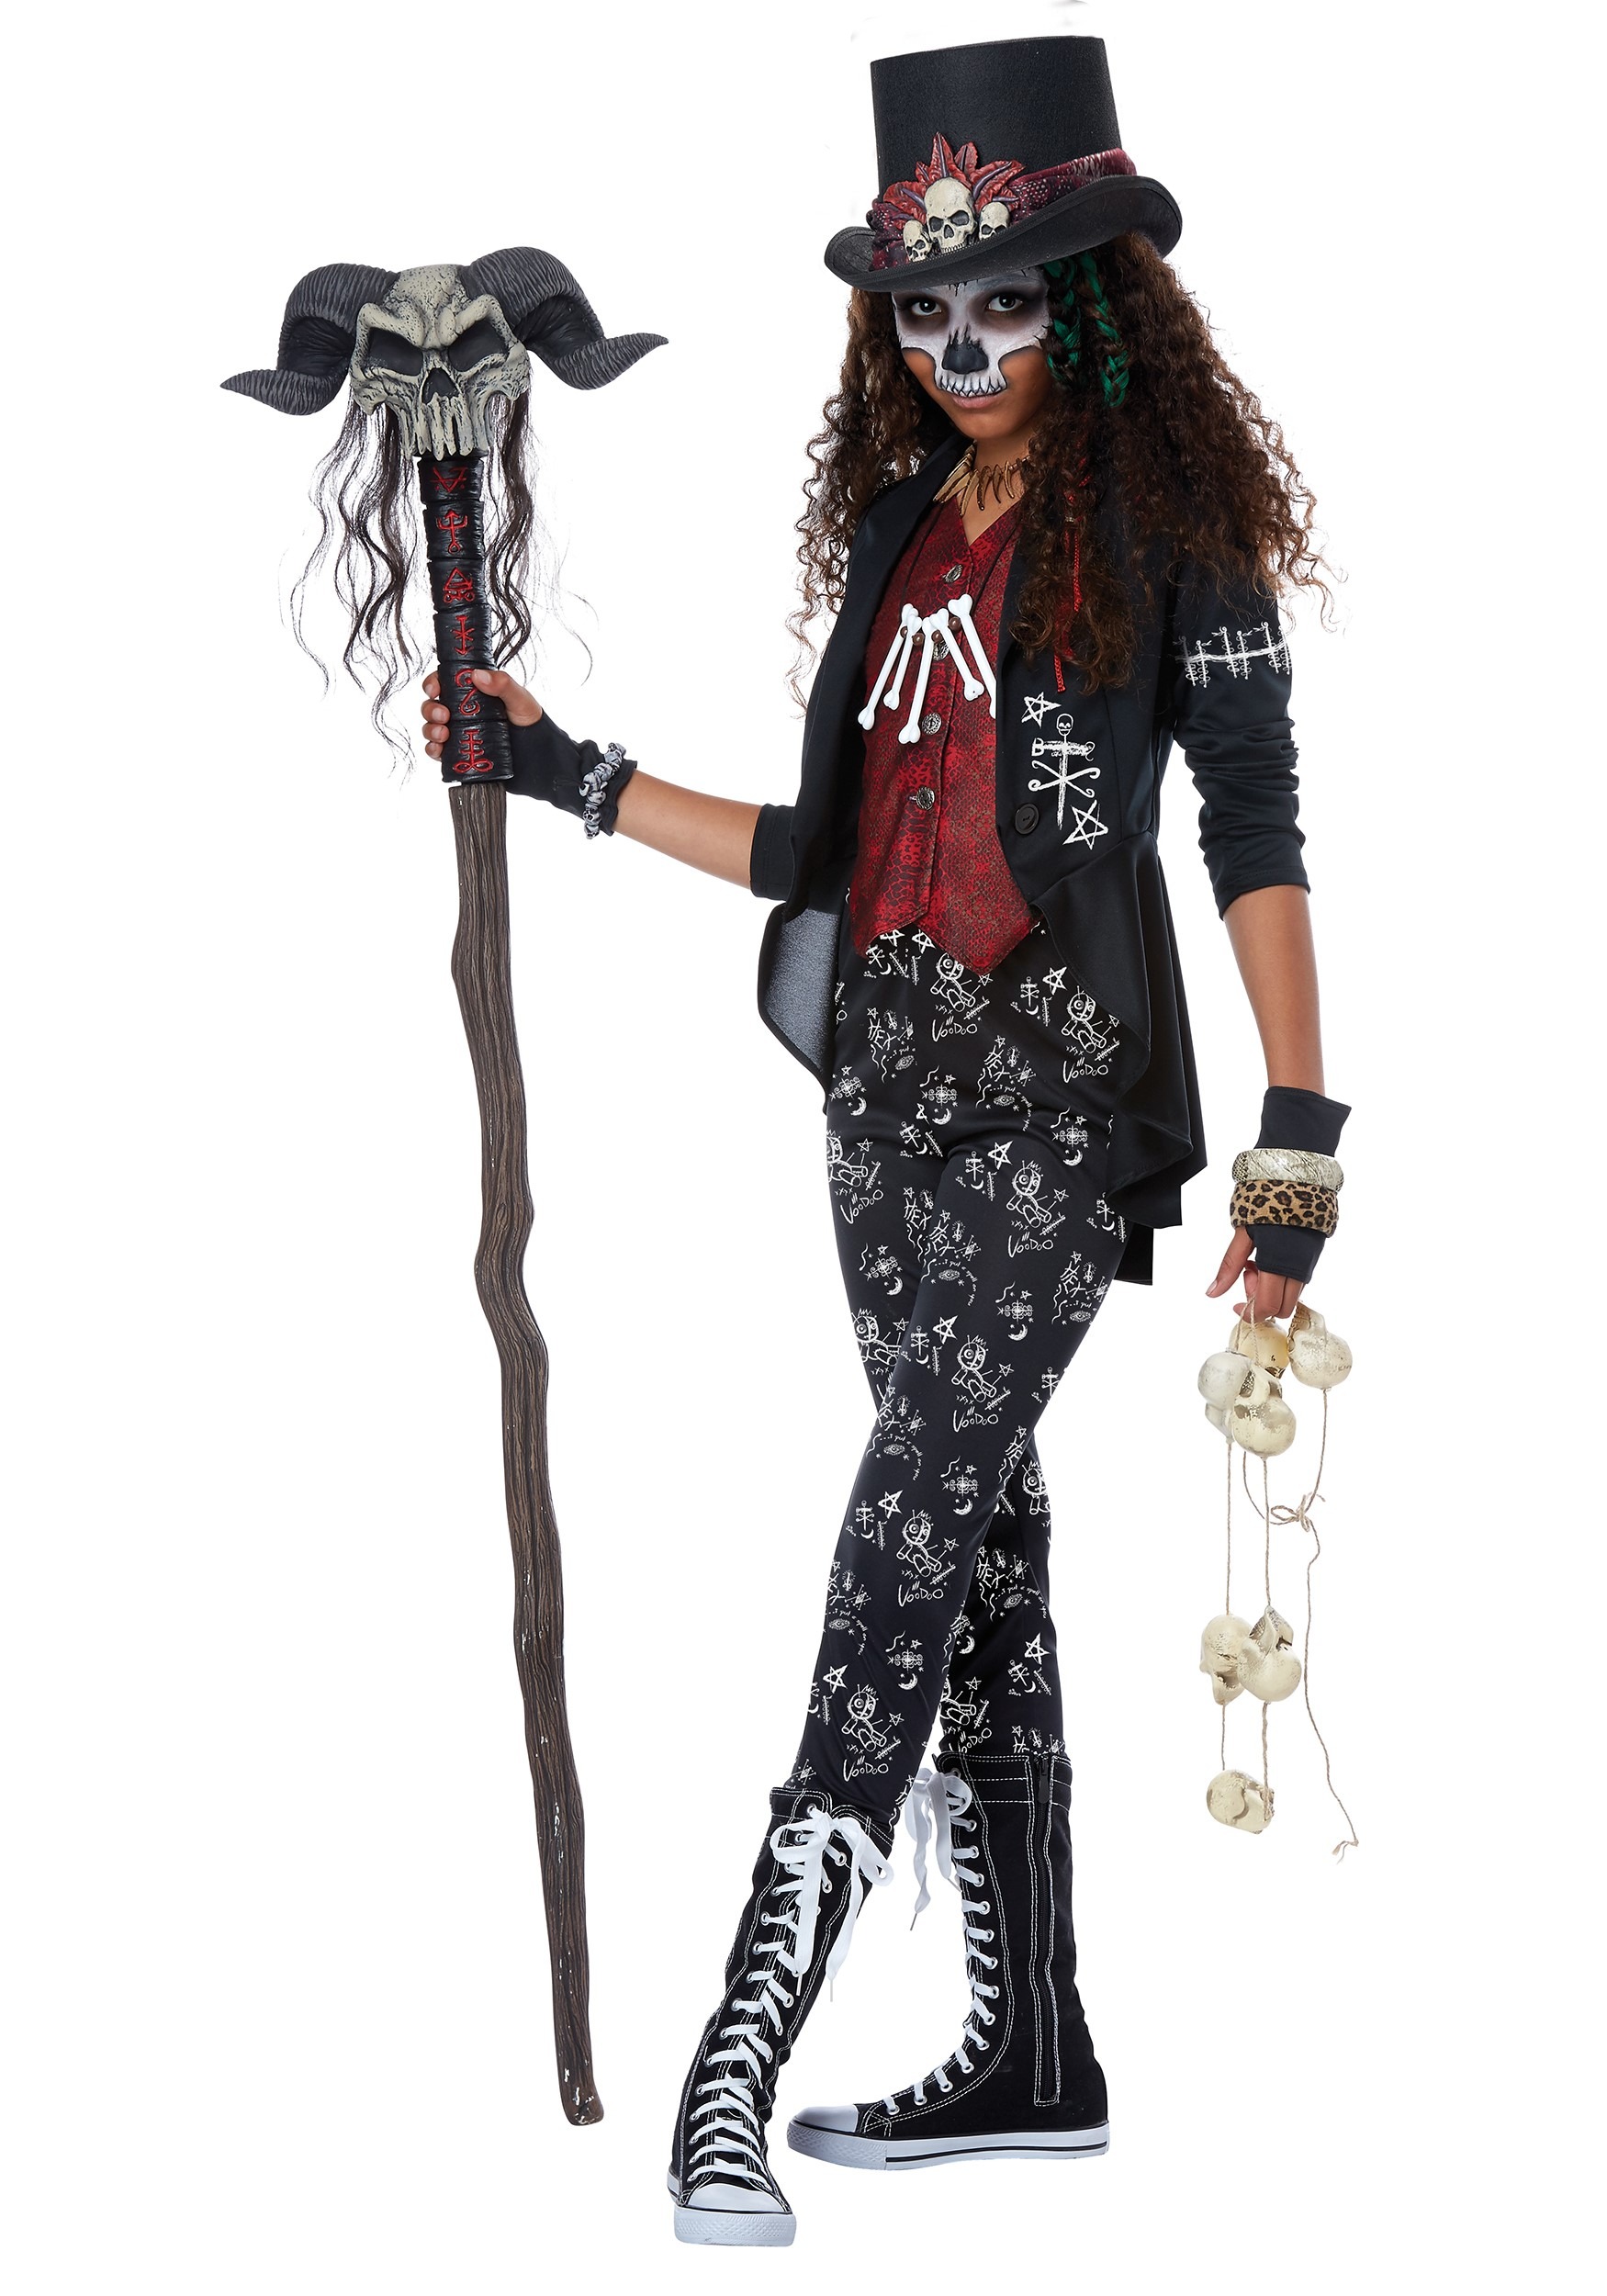 Photos - Fancy Dress California Costume Collection Voodoo Charm Costume For Girl's Black/Re 